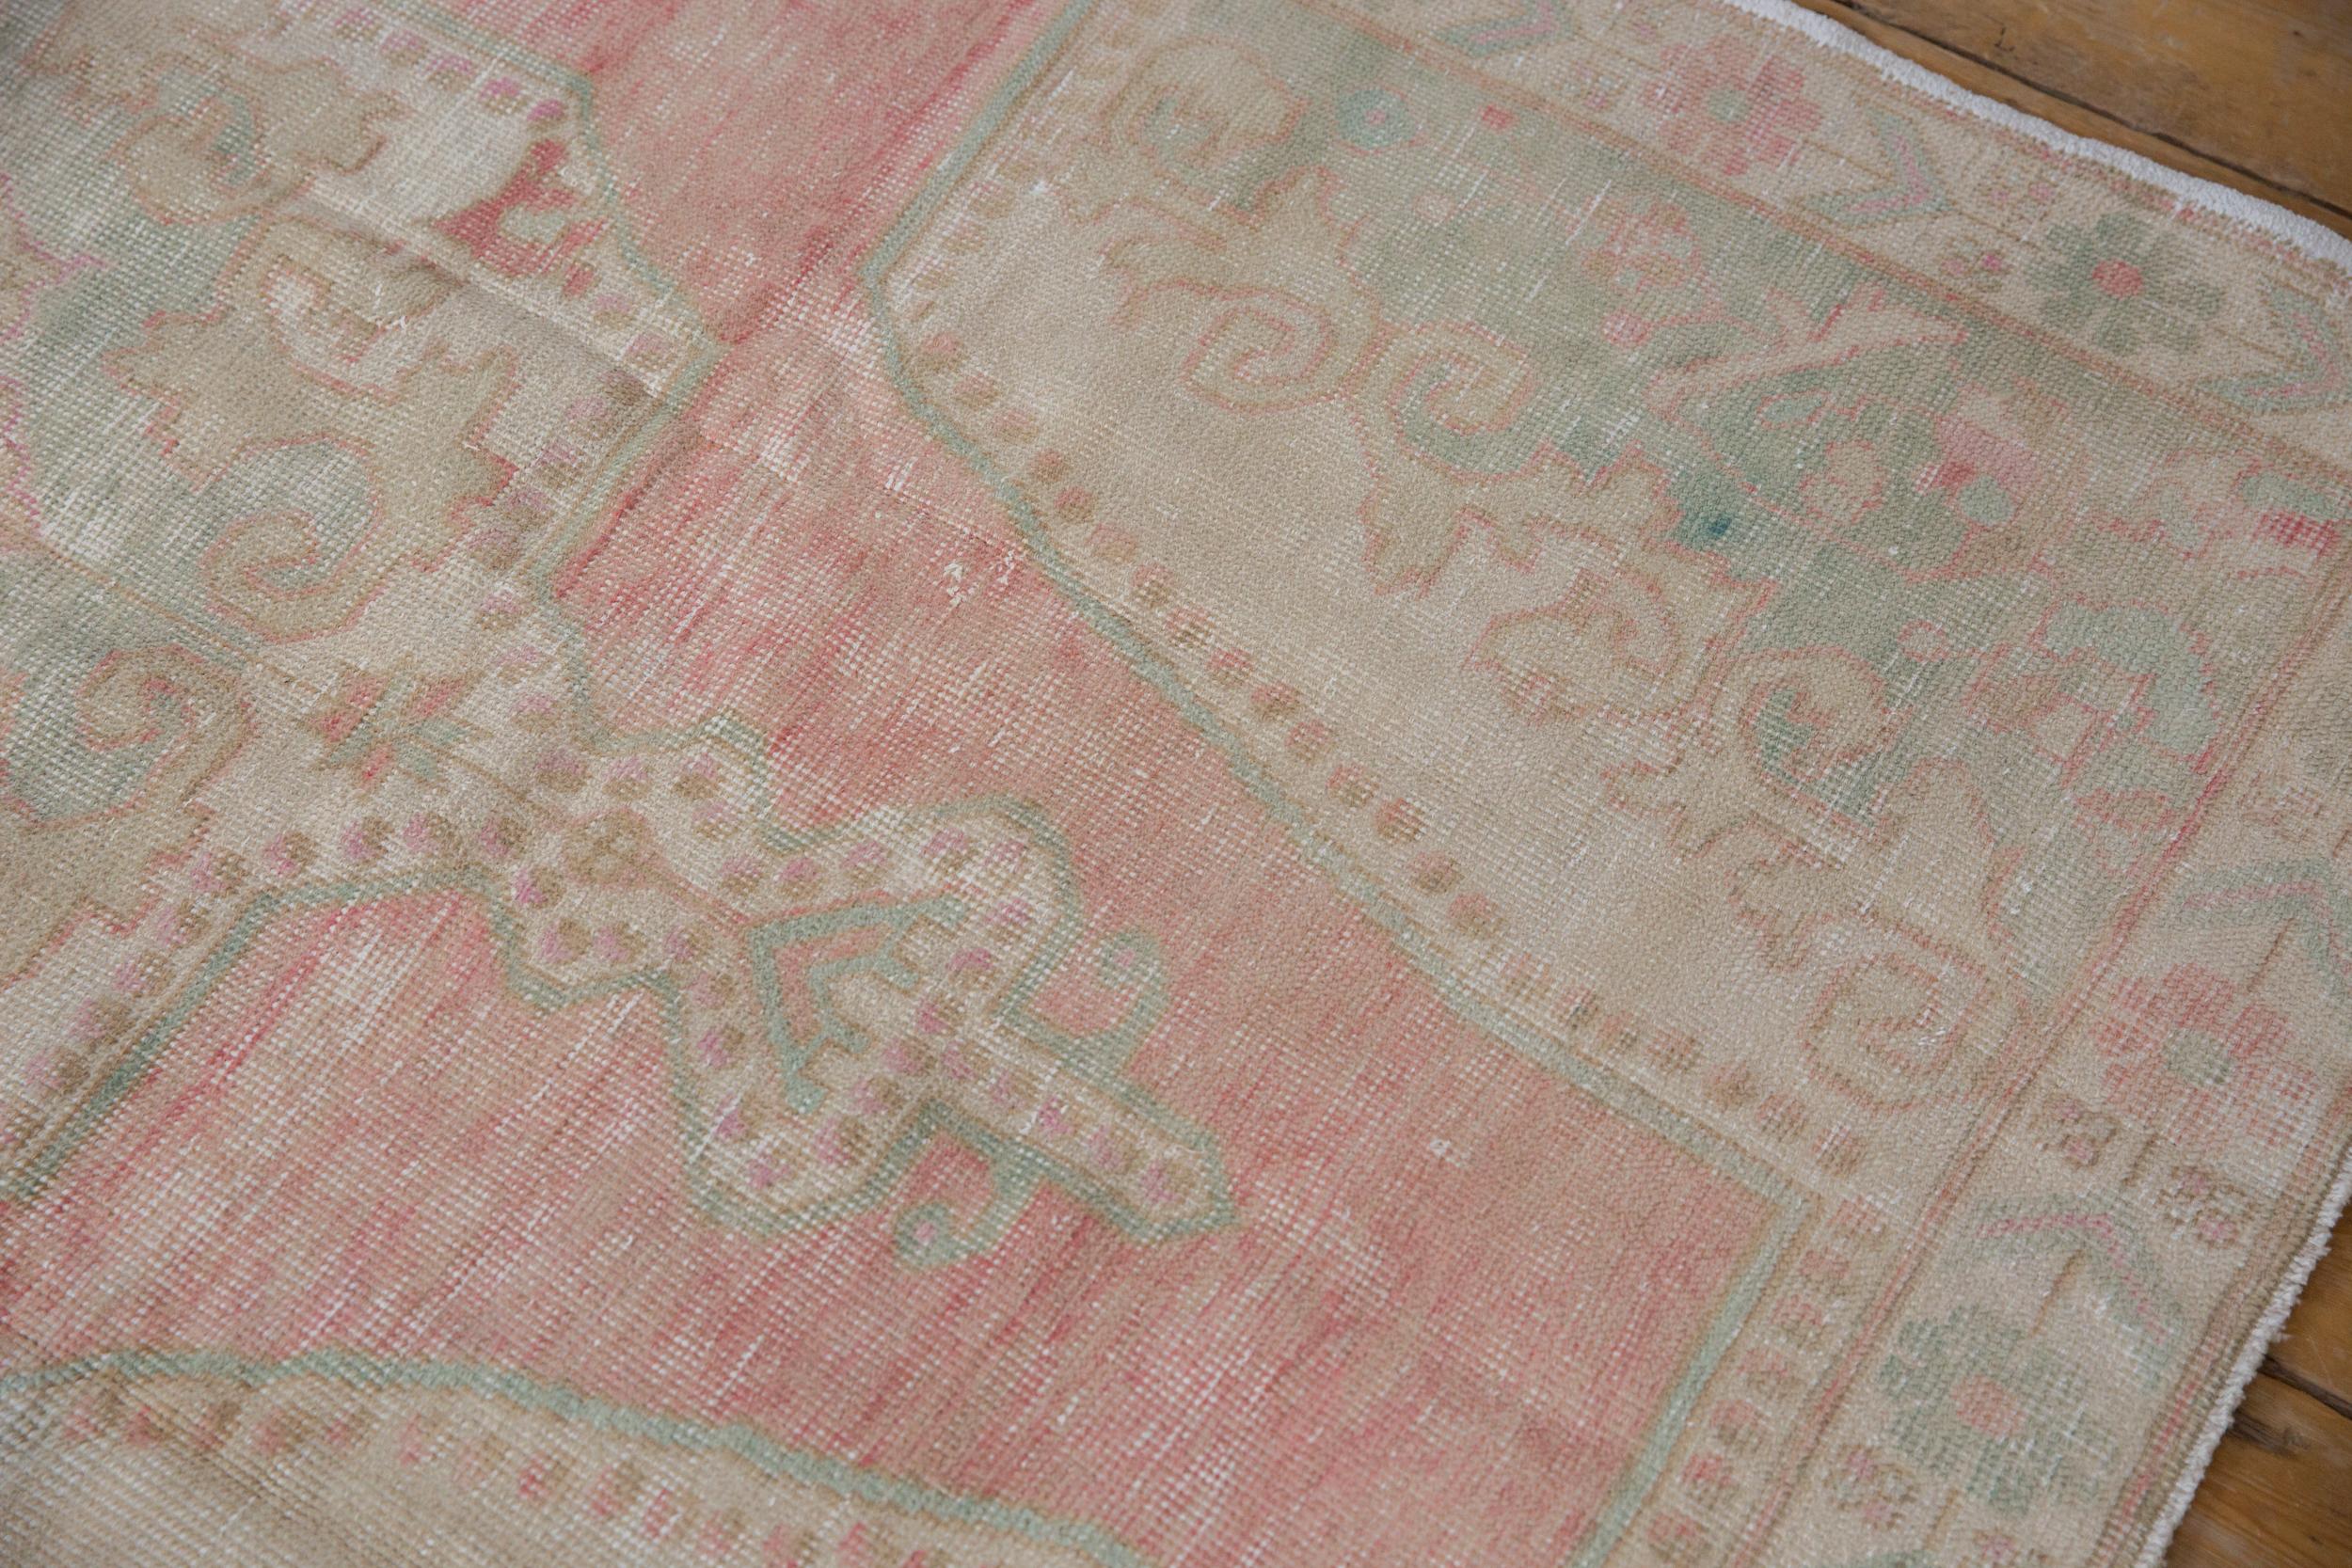 :: Oversize center medallion with trefoil contoured finials atop an abrashed ground and corner spandrel overlays in Rococo stylized fills with pearl perimeter. Colors and shades include: Pink, dusty pale red, sea foam ocean green, ivory, sand and